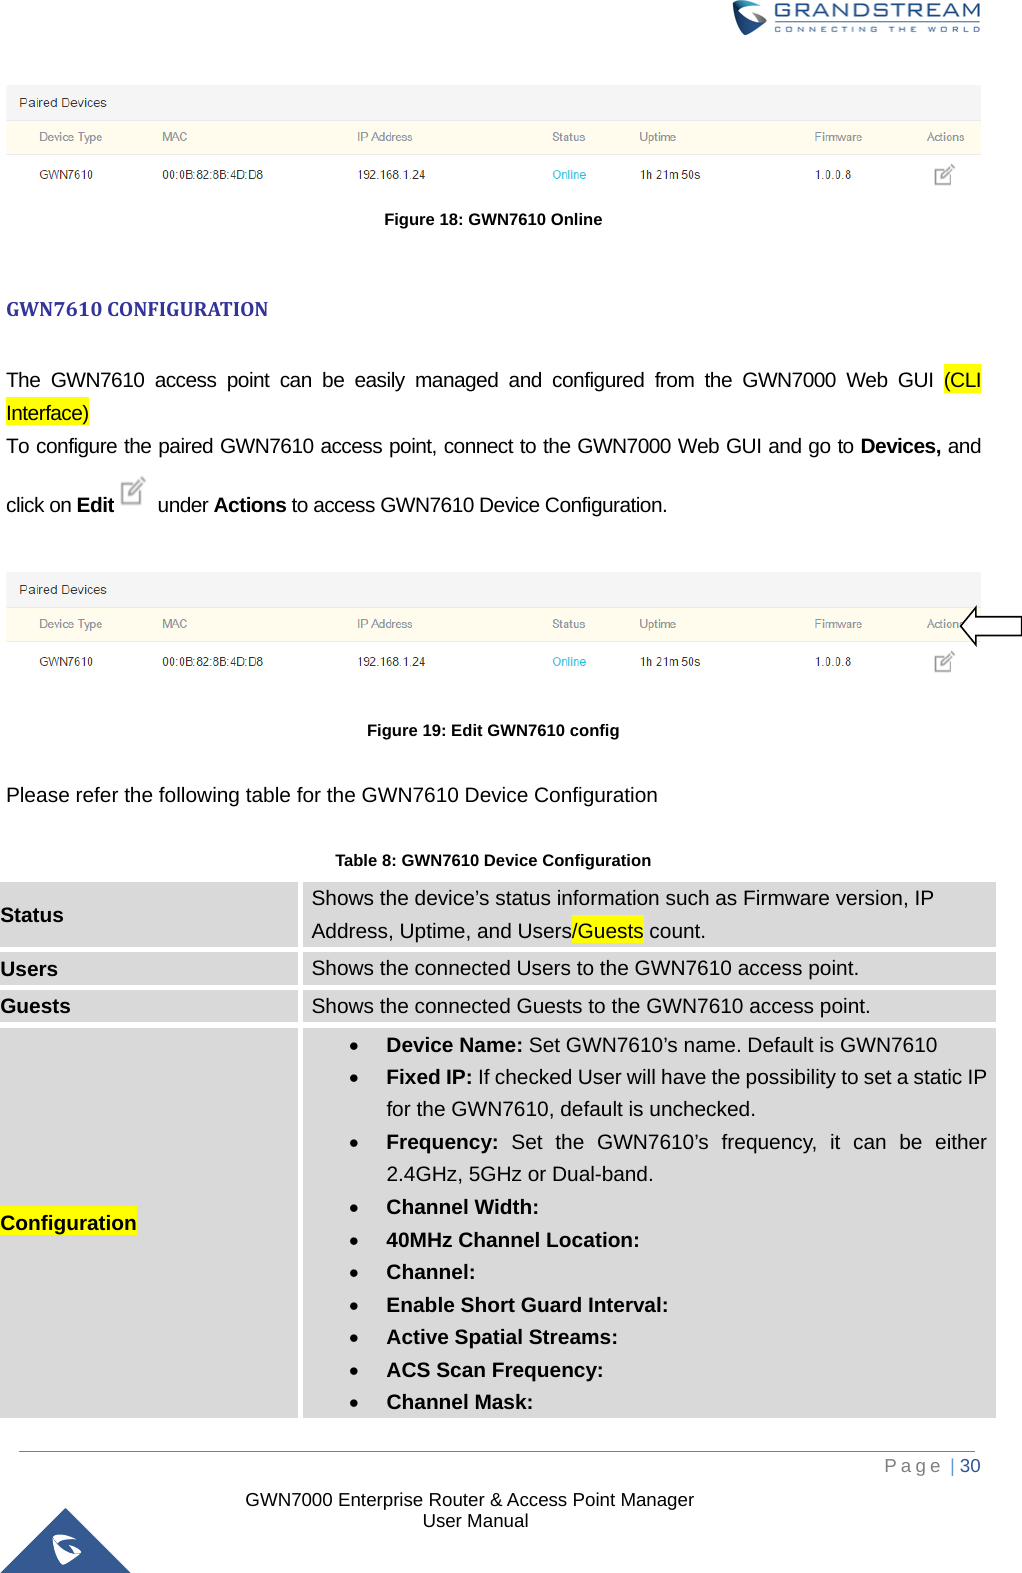  GWN7000 Enterprise Router &amp; Access Point Manager                    User Manual  Figure 18: GWN7610 Online  GWN7610 CONFIGURATION  The GWN7610 access point can be easily managed and configured from the GWN7000 Web GUI (CLI Interface)   To configure the paired GWN7610 access point, connect to the GWN7000 Web GUI and go to Devices, and click on Edit  under Actions to access GWN7610 Device Configuration.   Figure 19: Edit GWN7610 config  Please refer the following table for the GWN7610 Device Configuration    Table 8: GWN7610 Device Configuration Status Shows the device’s status information such as Firmware version, IP Address, Uptime, and Users/Guests count. Users Shows the connected Users to the GWN7610 access point. Guests Shows the connected Guests to the GWN7610 access point. Configuration • Device Name: Set GWN7610’s name. Default is GWN7610 • Fixed IP: If checked User will have the possibility to set a static IP for the GWN7610, default is unchecked. • Frequency:  Set the GWN7610’s frequency, it can be either 2.4GHz, 5GHz or Dual-band. • Channel Width: • 40MHz Channel Location: • Channel: • Enable Short Guard Interval: • Active Spatial Streams: • ACS Scan Frequency: • Channel Mask:     Page | 30     